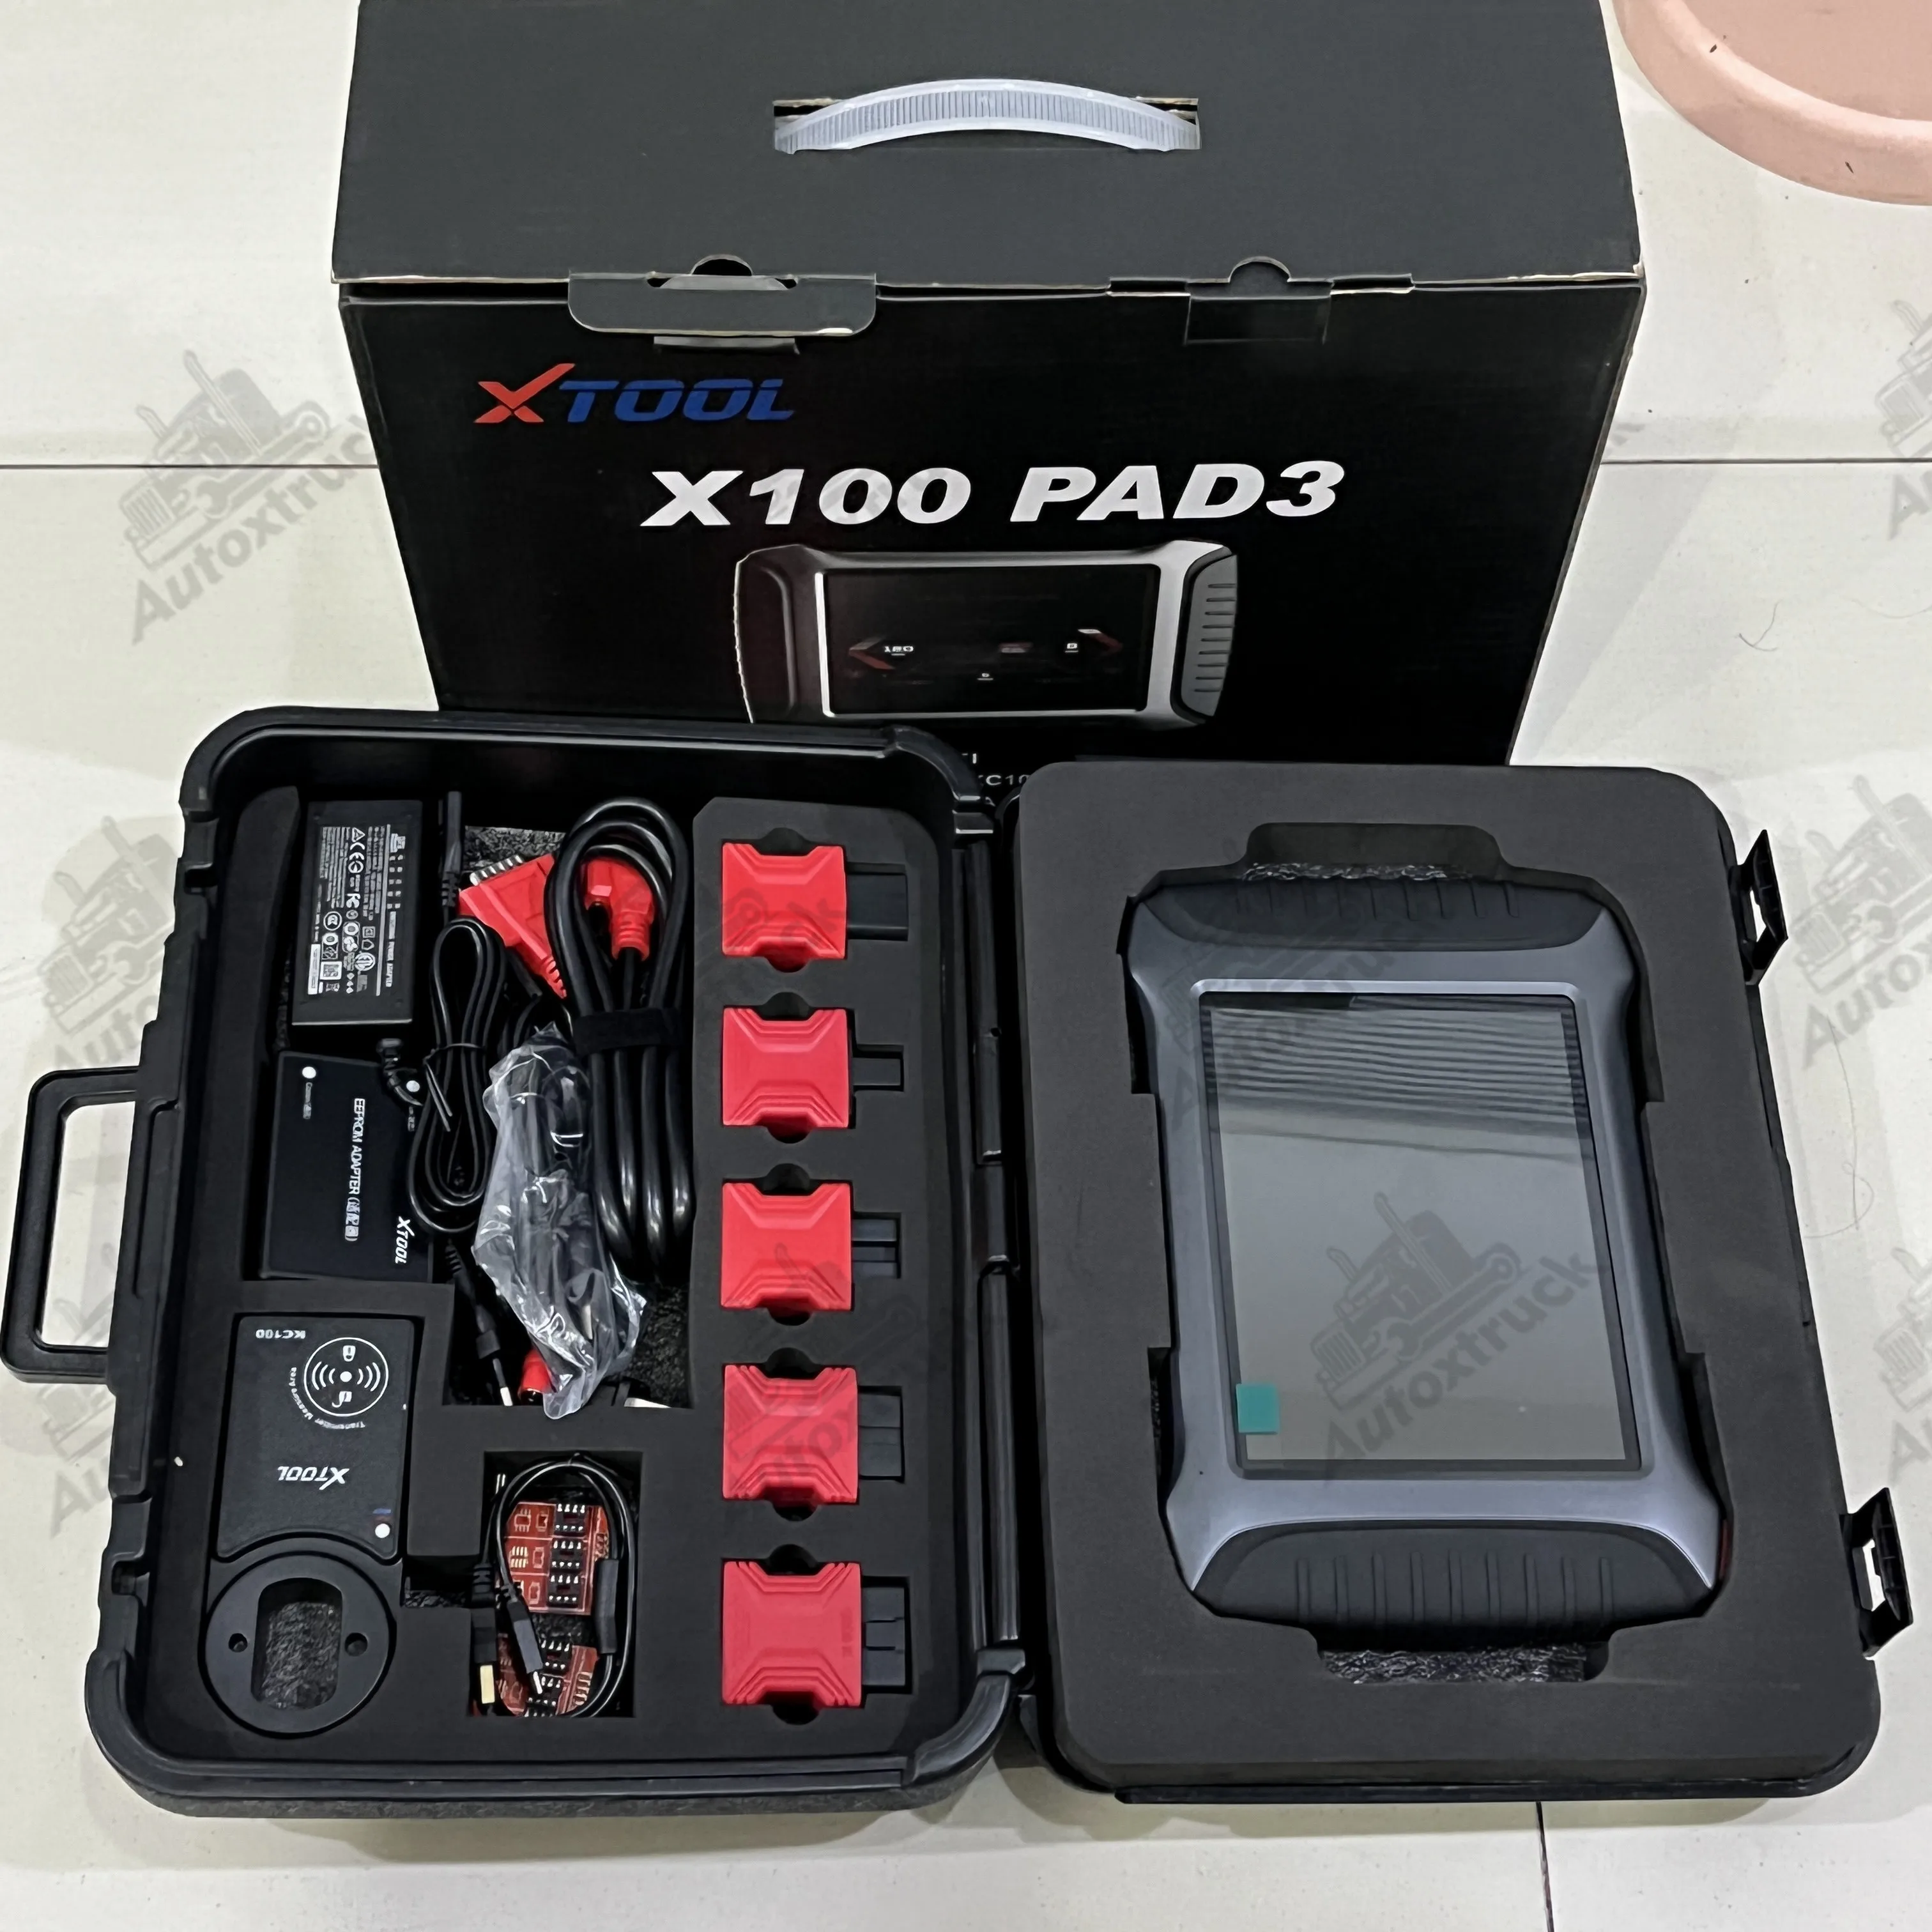 

2022 XTOOL X100 PAD3 SE Key Programmer With 21 Reset Function Diagnosis tools Scanner Free Update Online